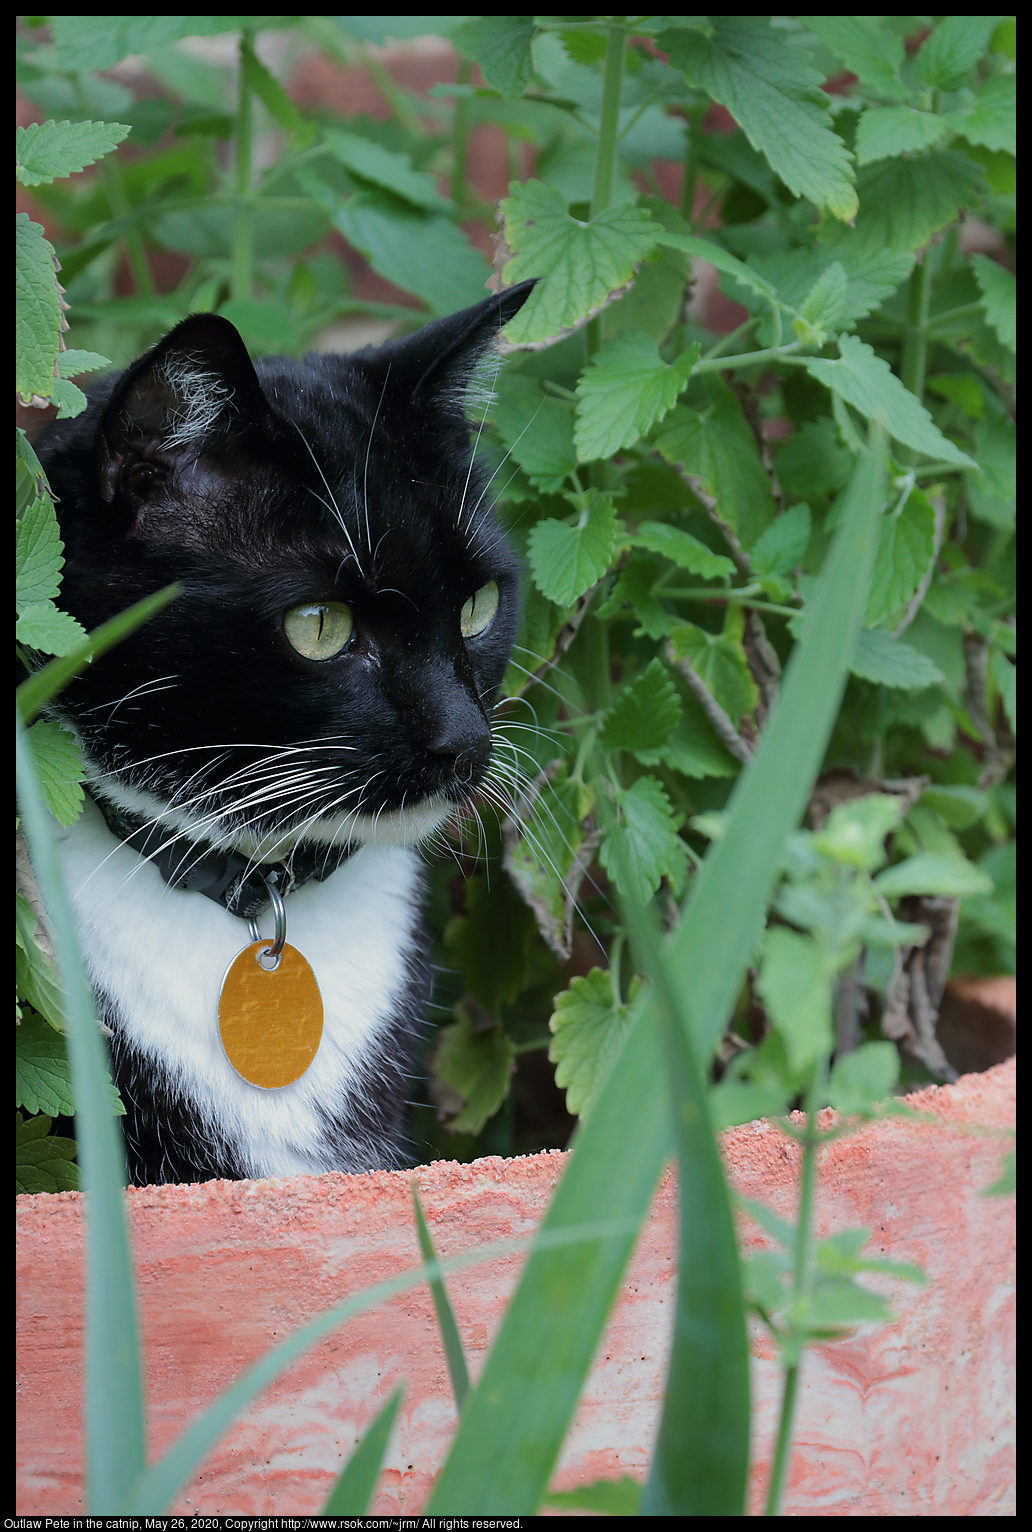 Outlaw Pete in the catnip, May 26, 2020